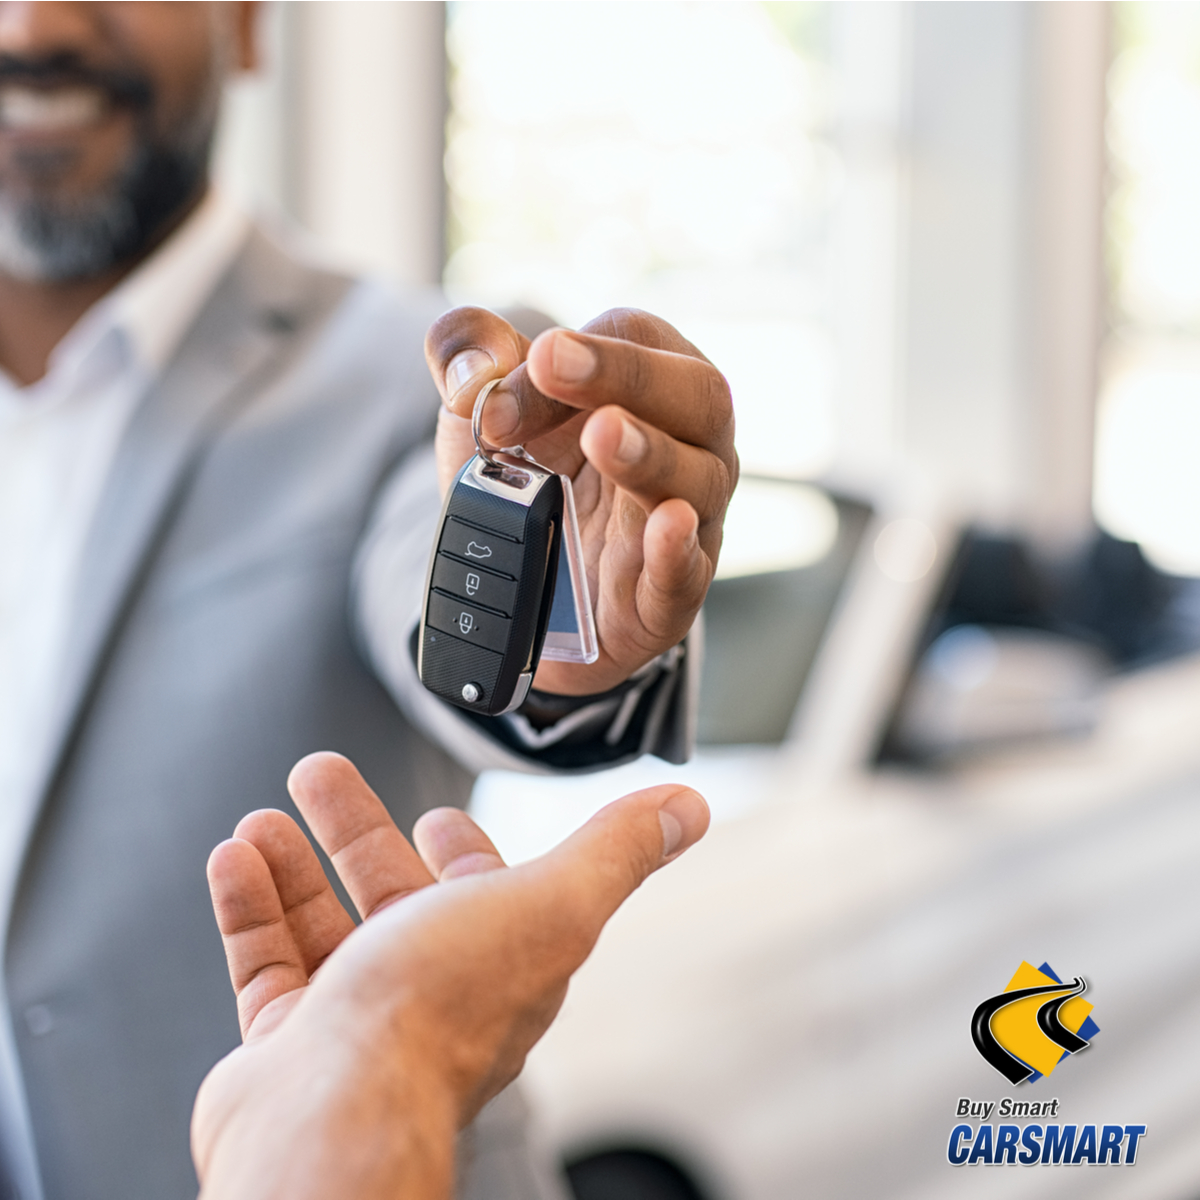 Have an Easier Time and a More Positive Experience Shopping for Used Cars with Us